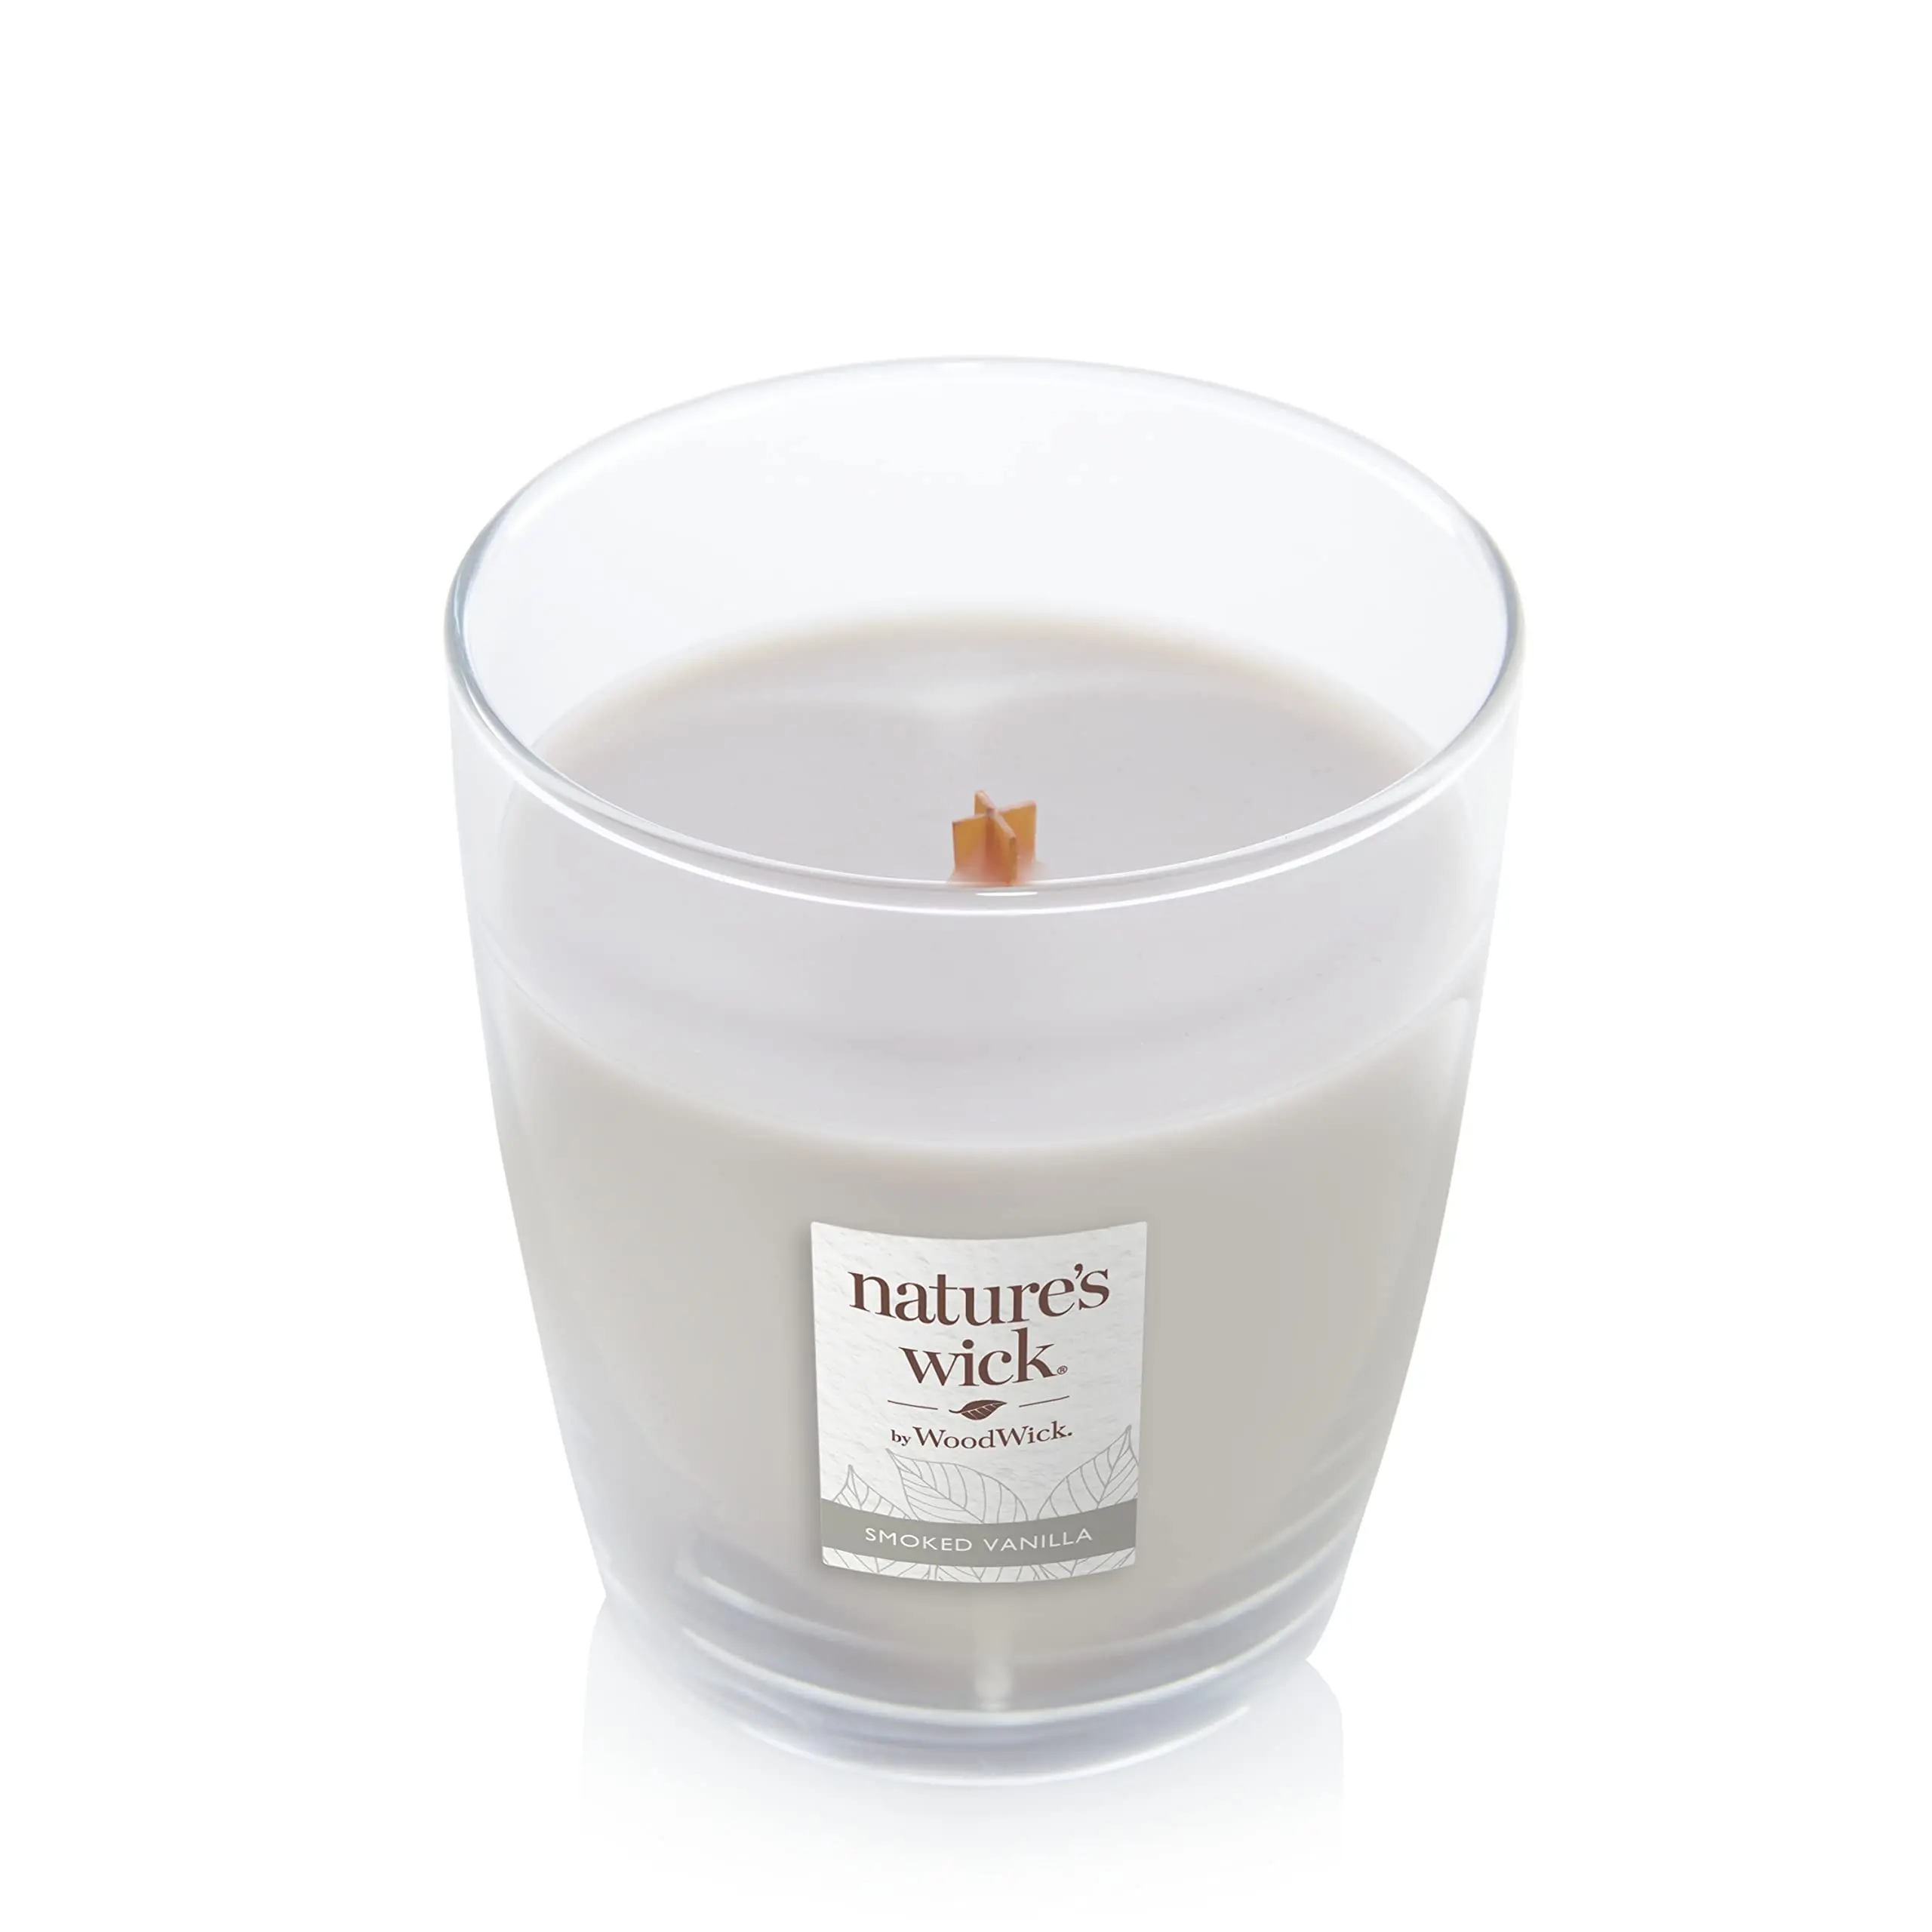 nature's wick smoked vanilla - Which WoodWick candle burns the longest